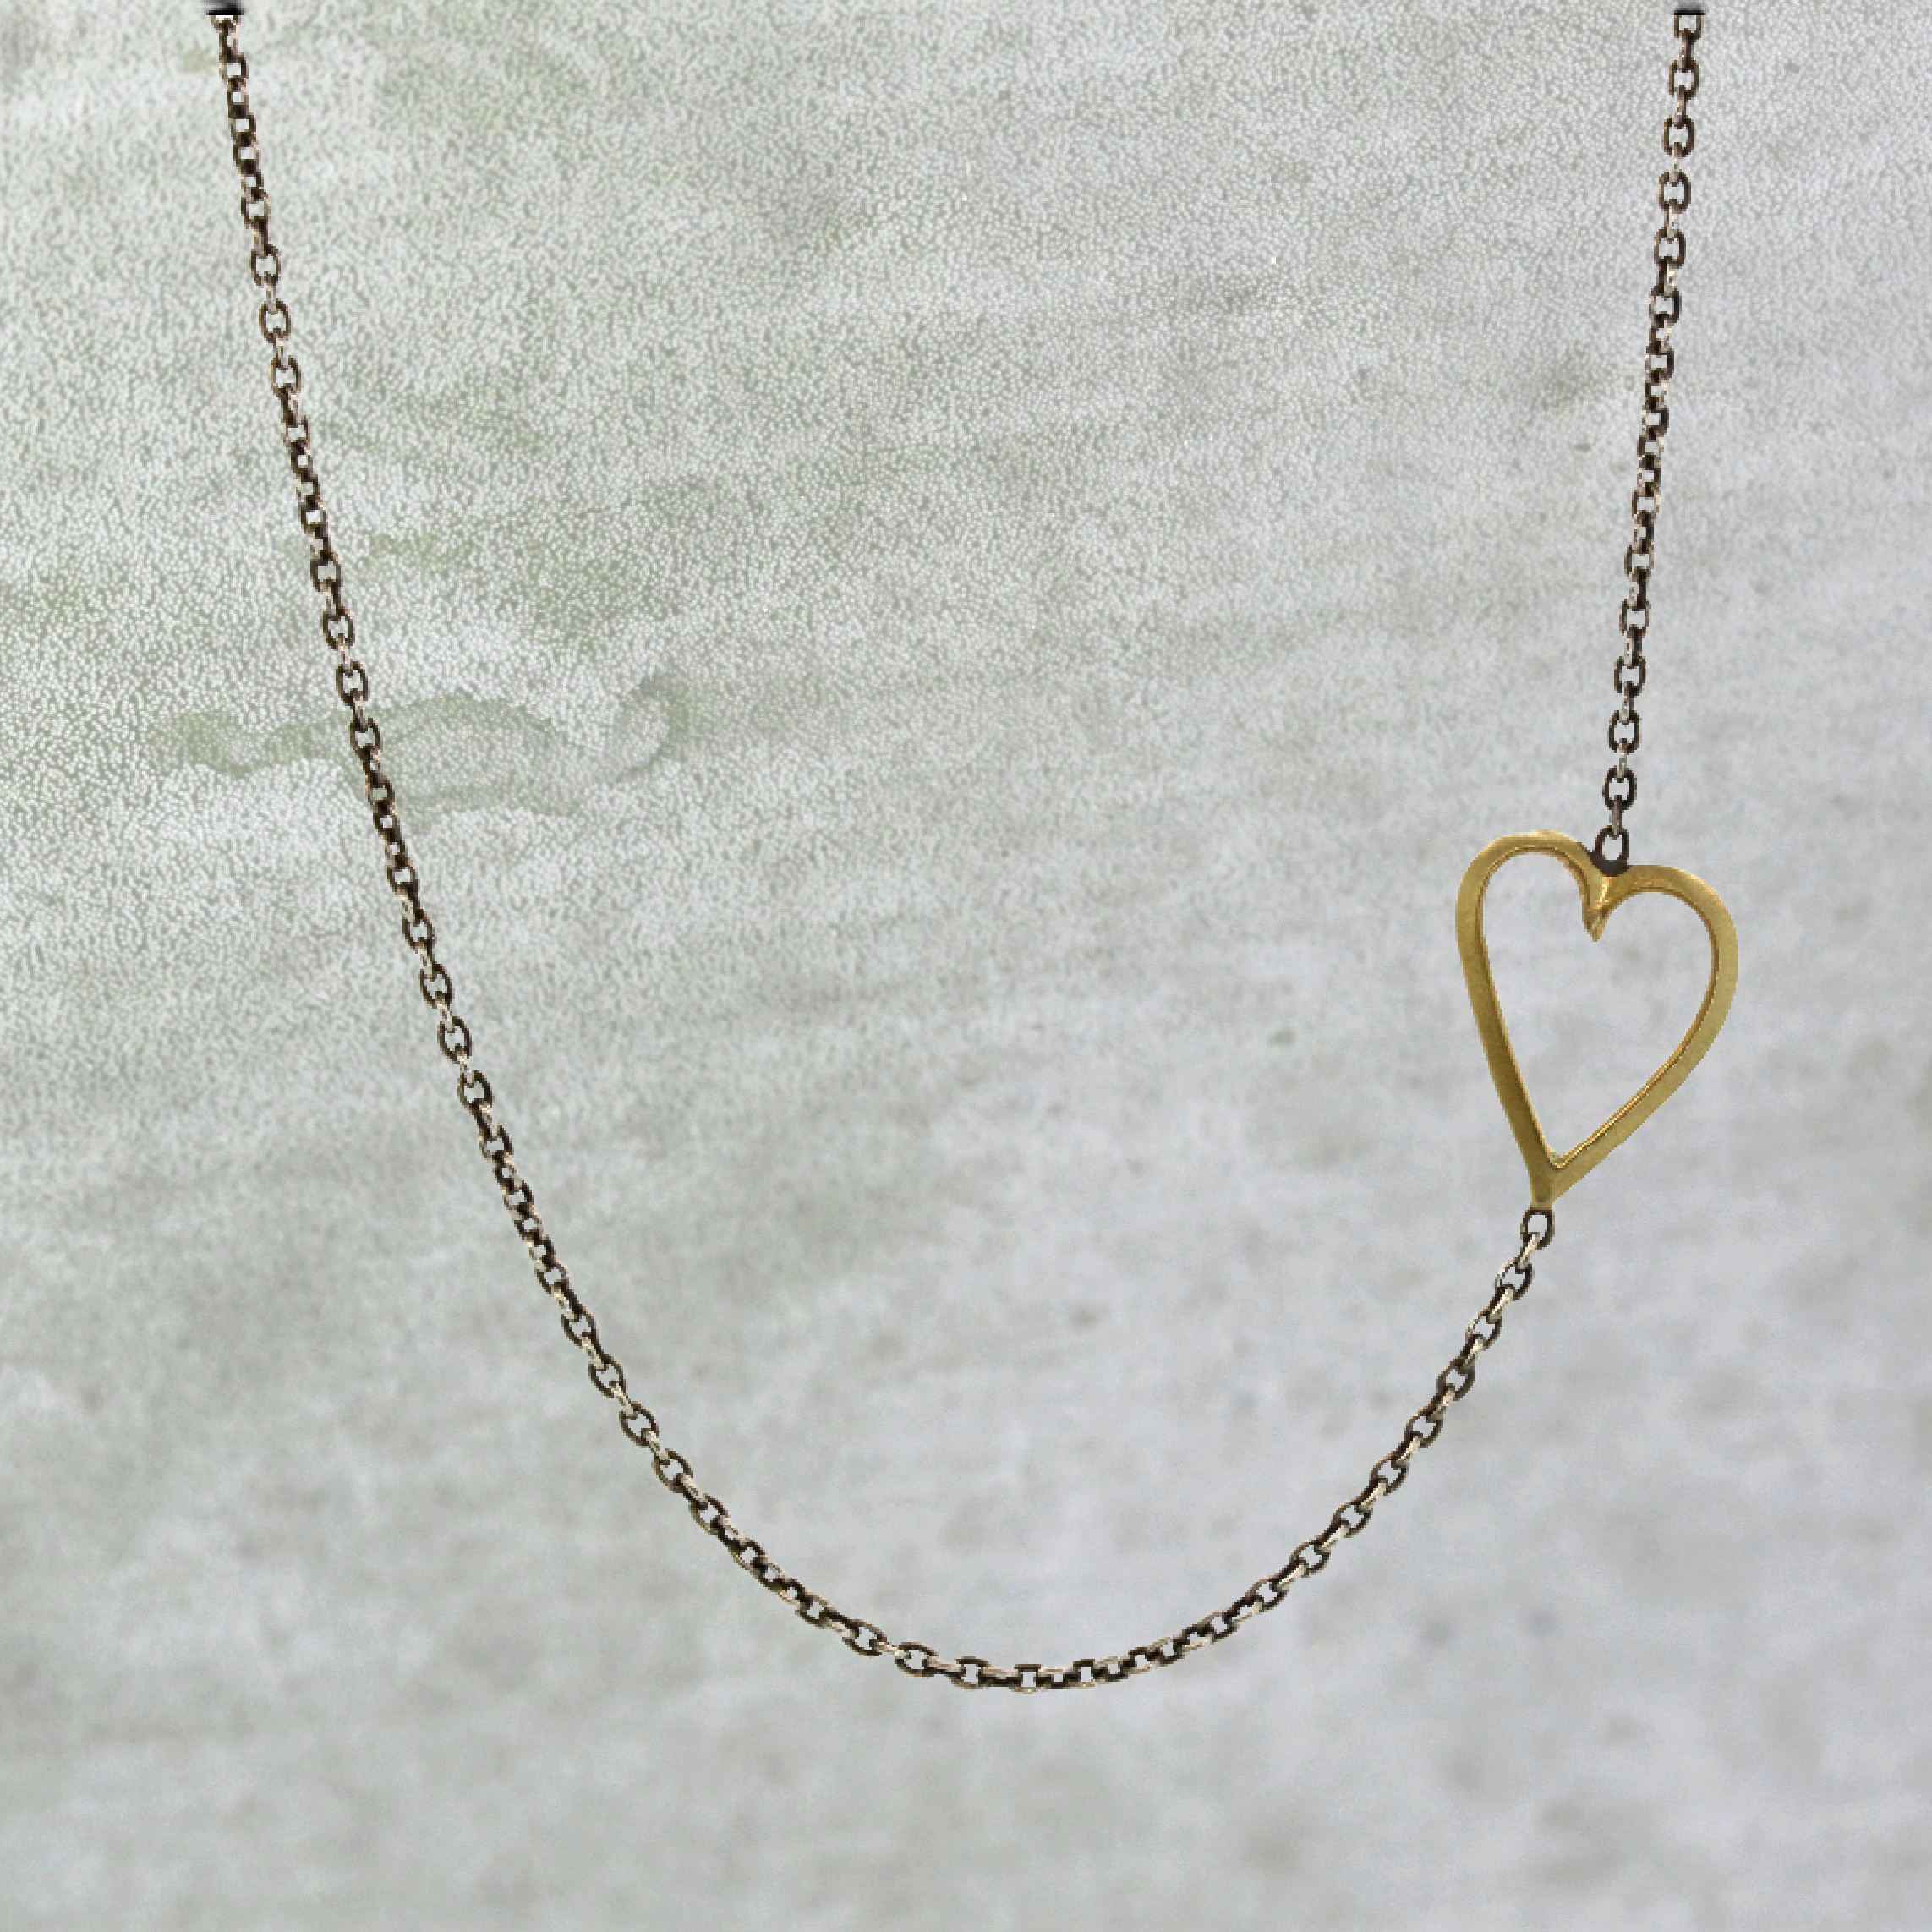 2 Small Hearts Necklace, Beth Jewelry, sideways hearts